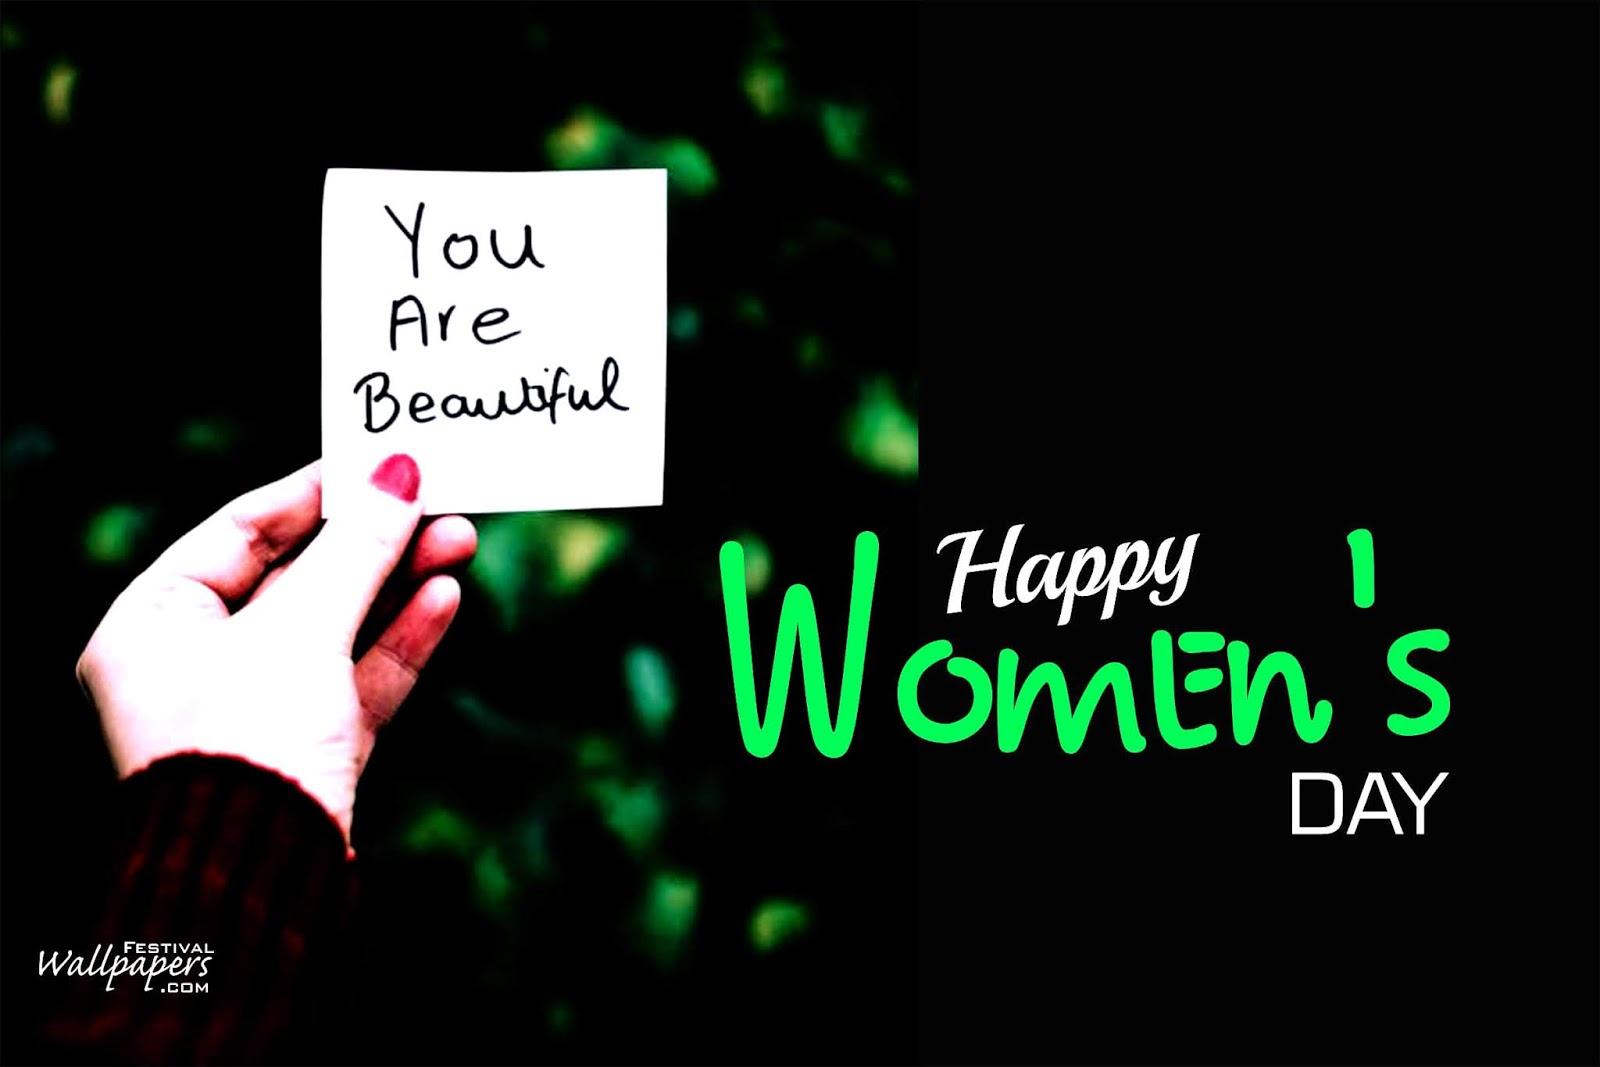 Happy Women's Day Image, Quotes and Wishes in English